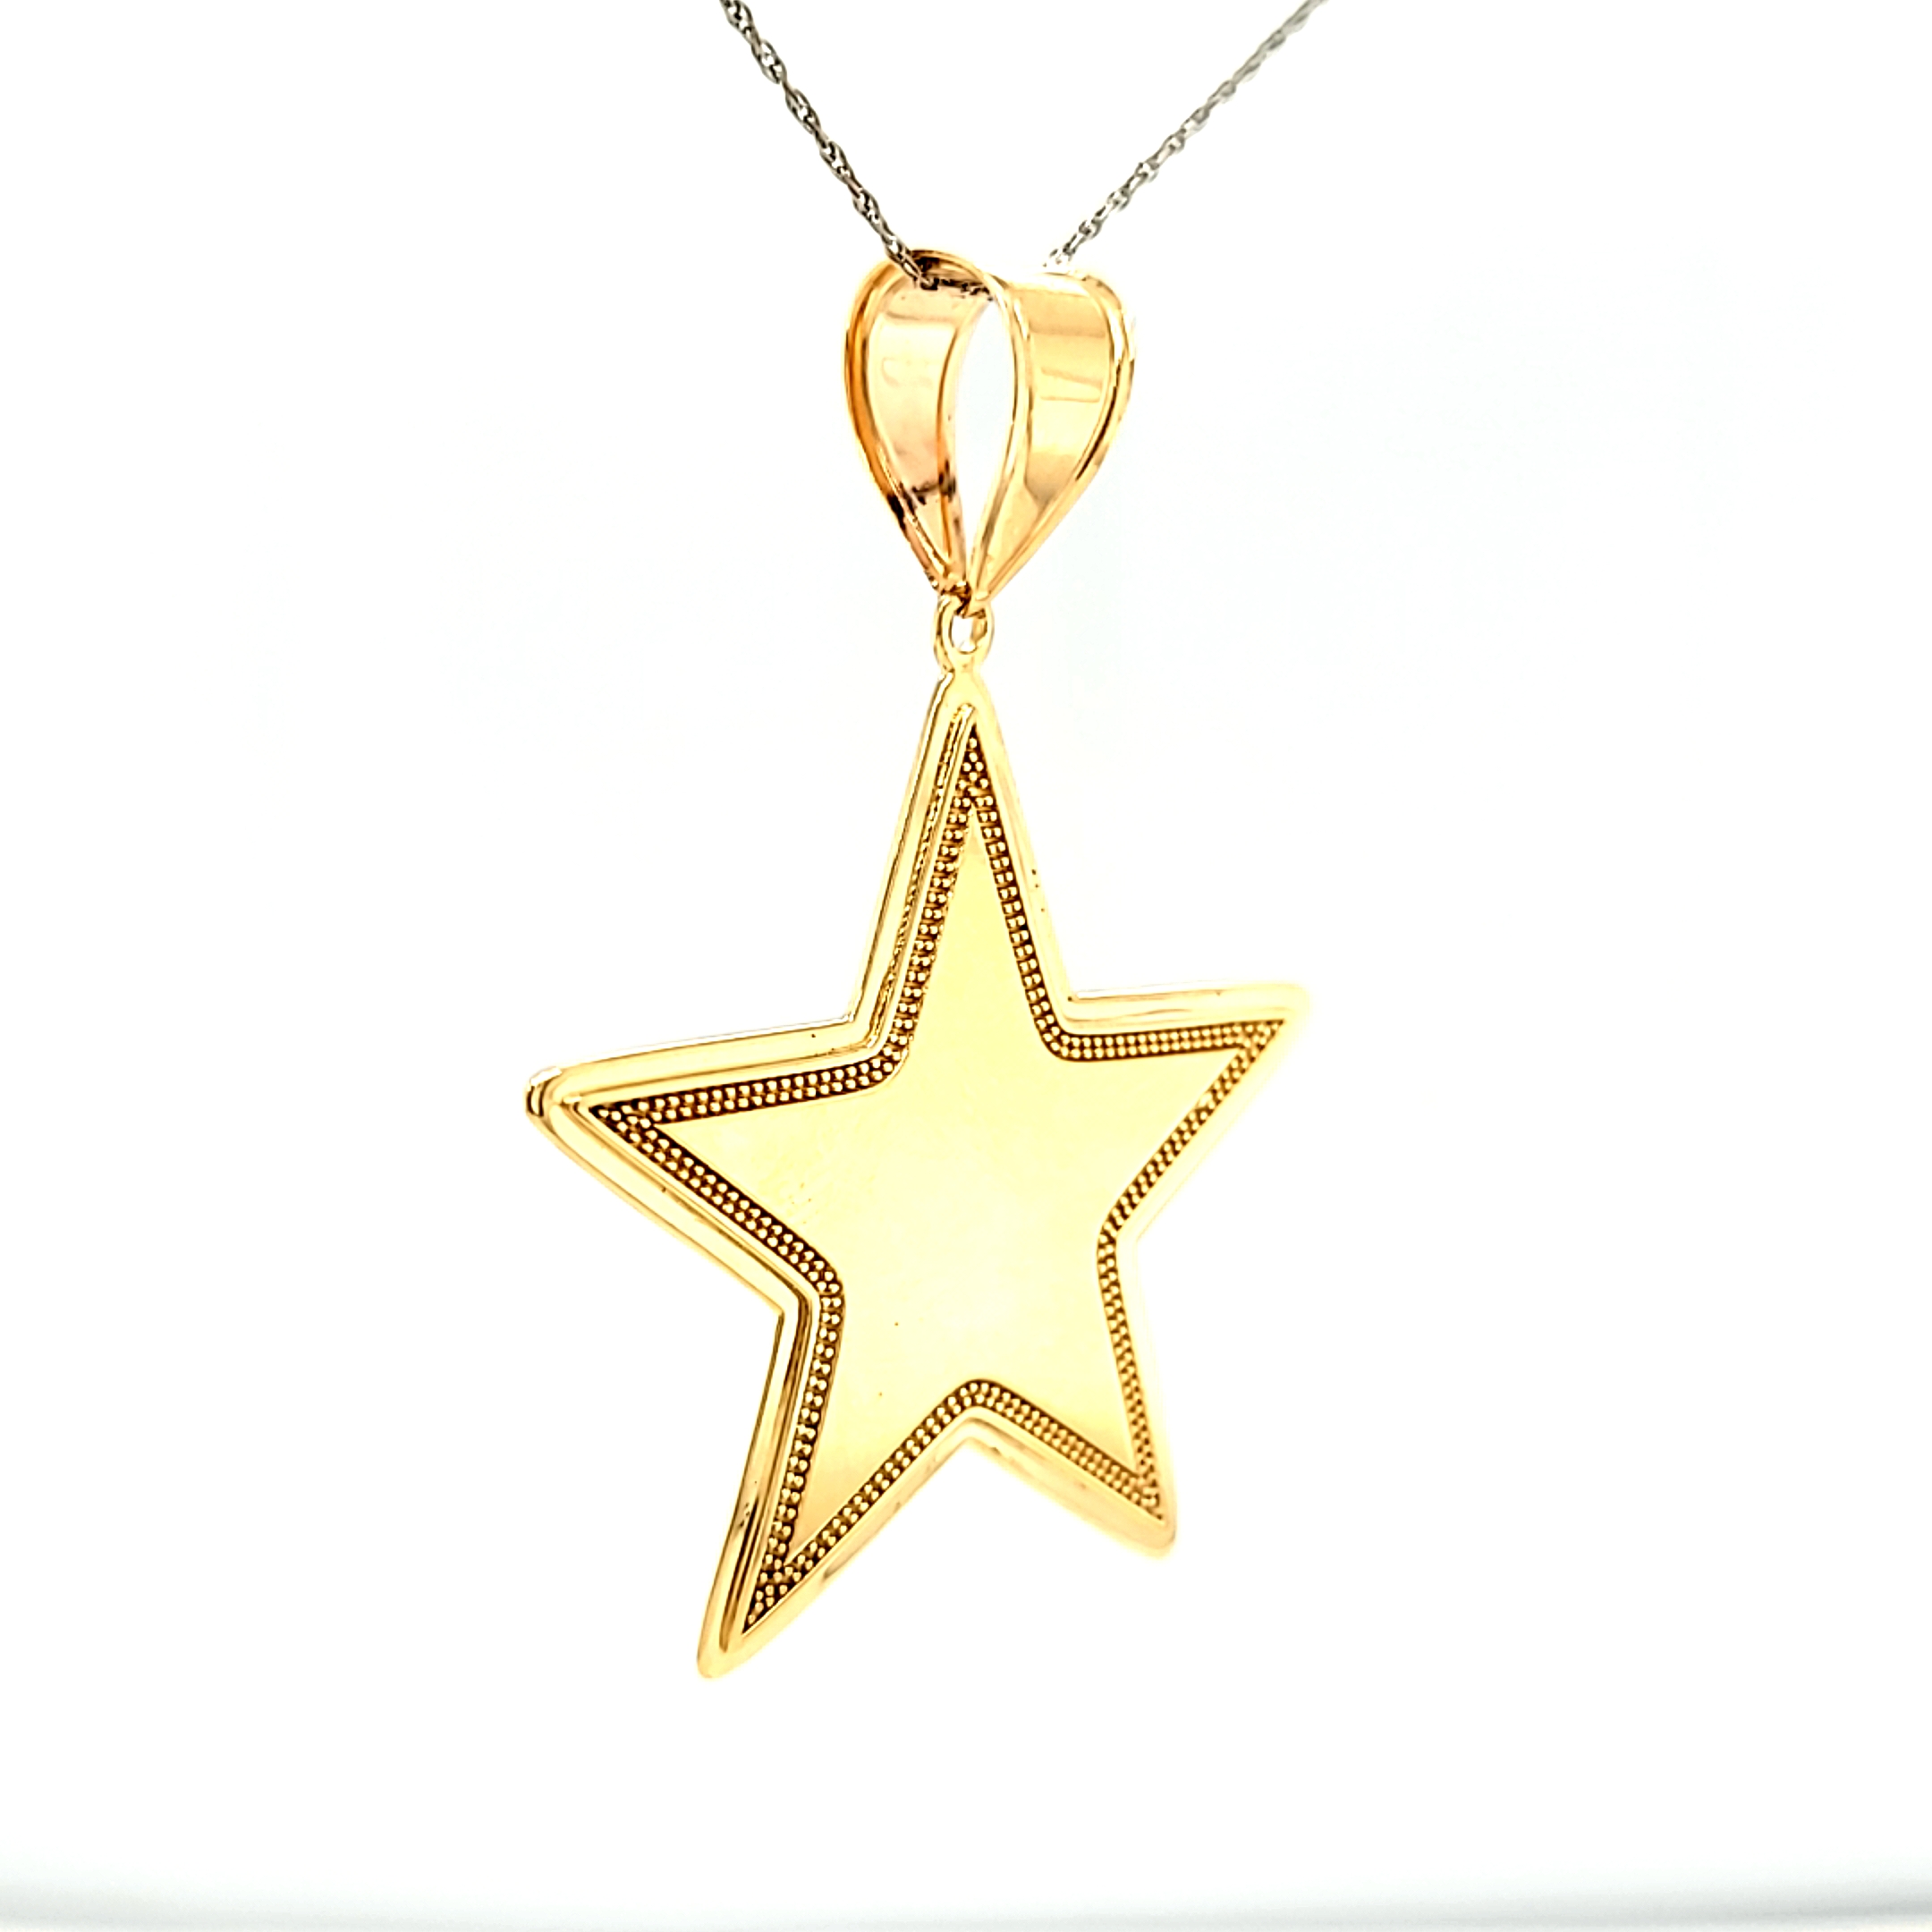 Share 126+ dallas cowboys star necklace latest 